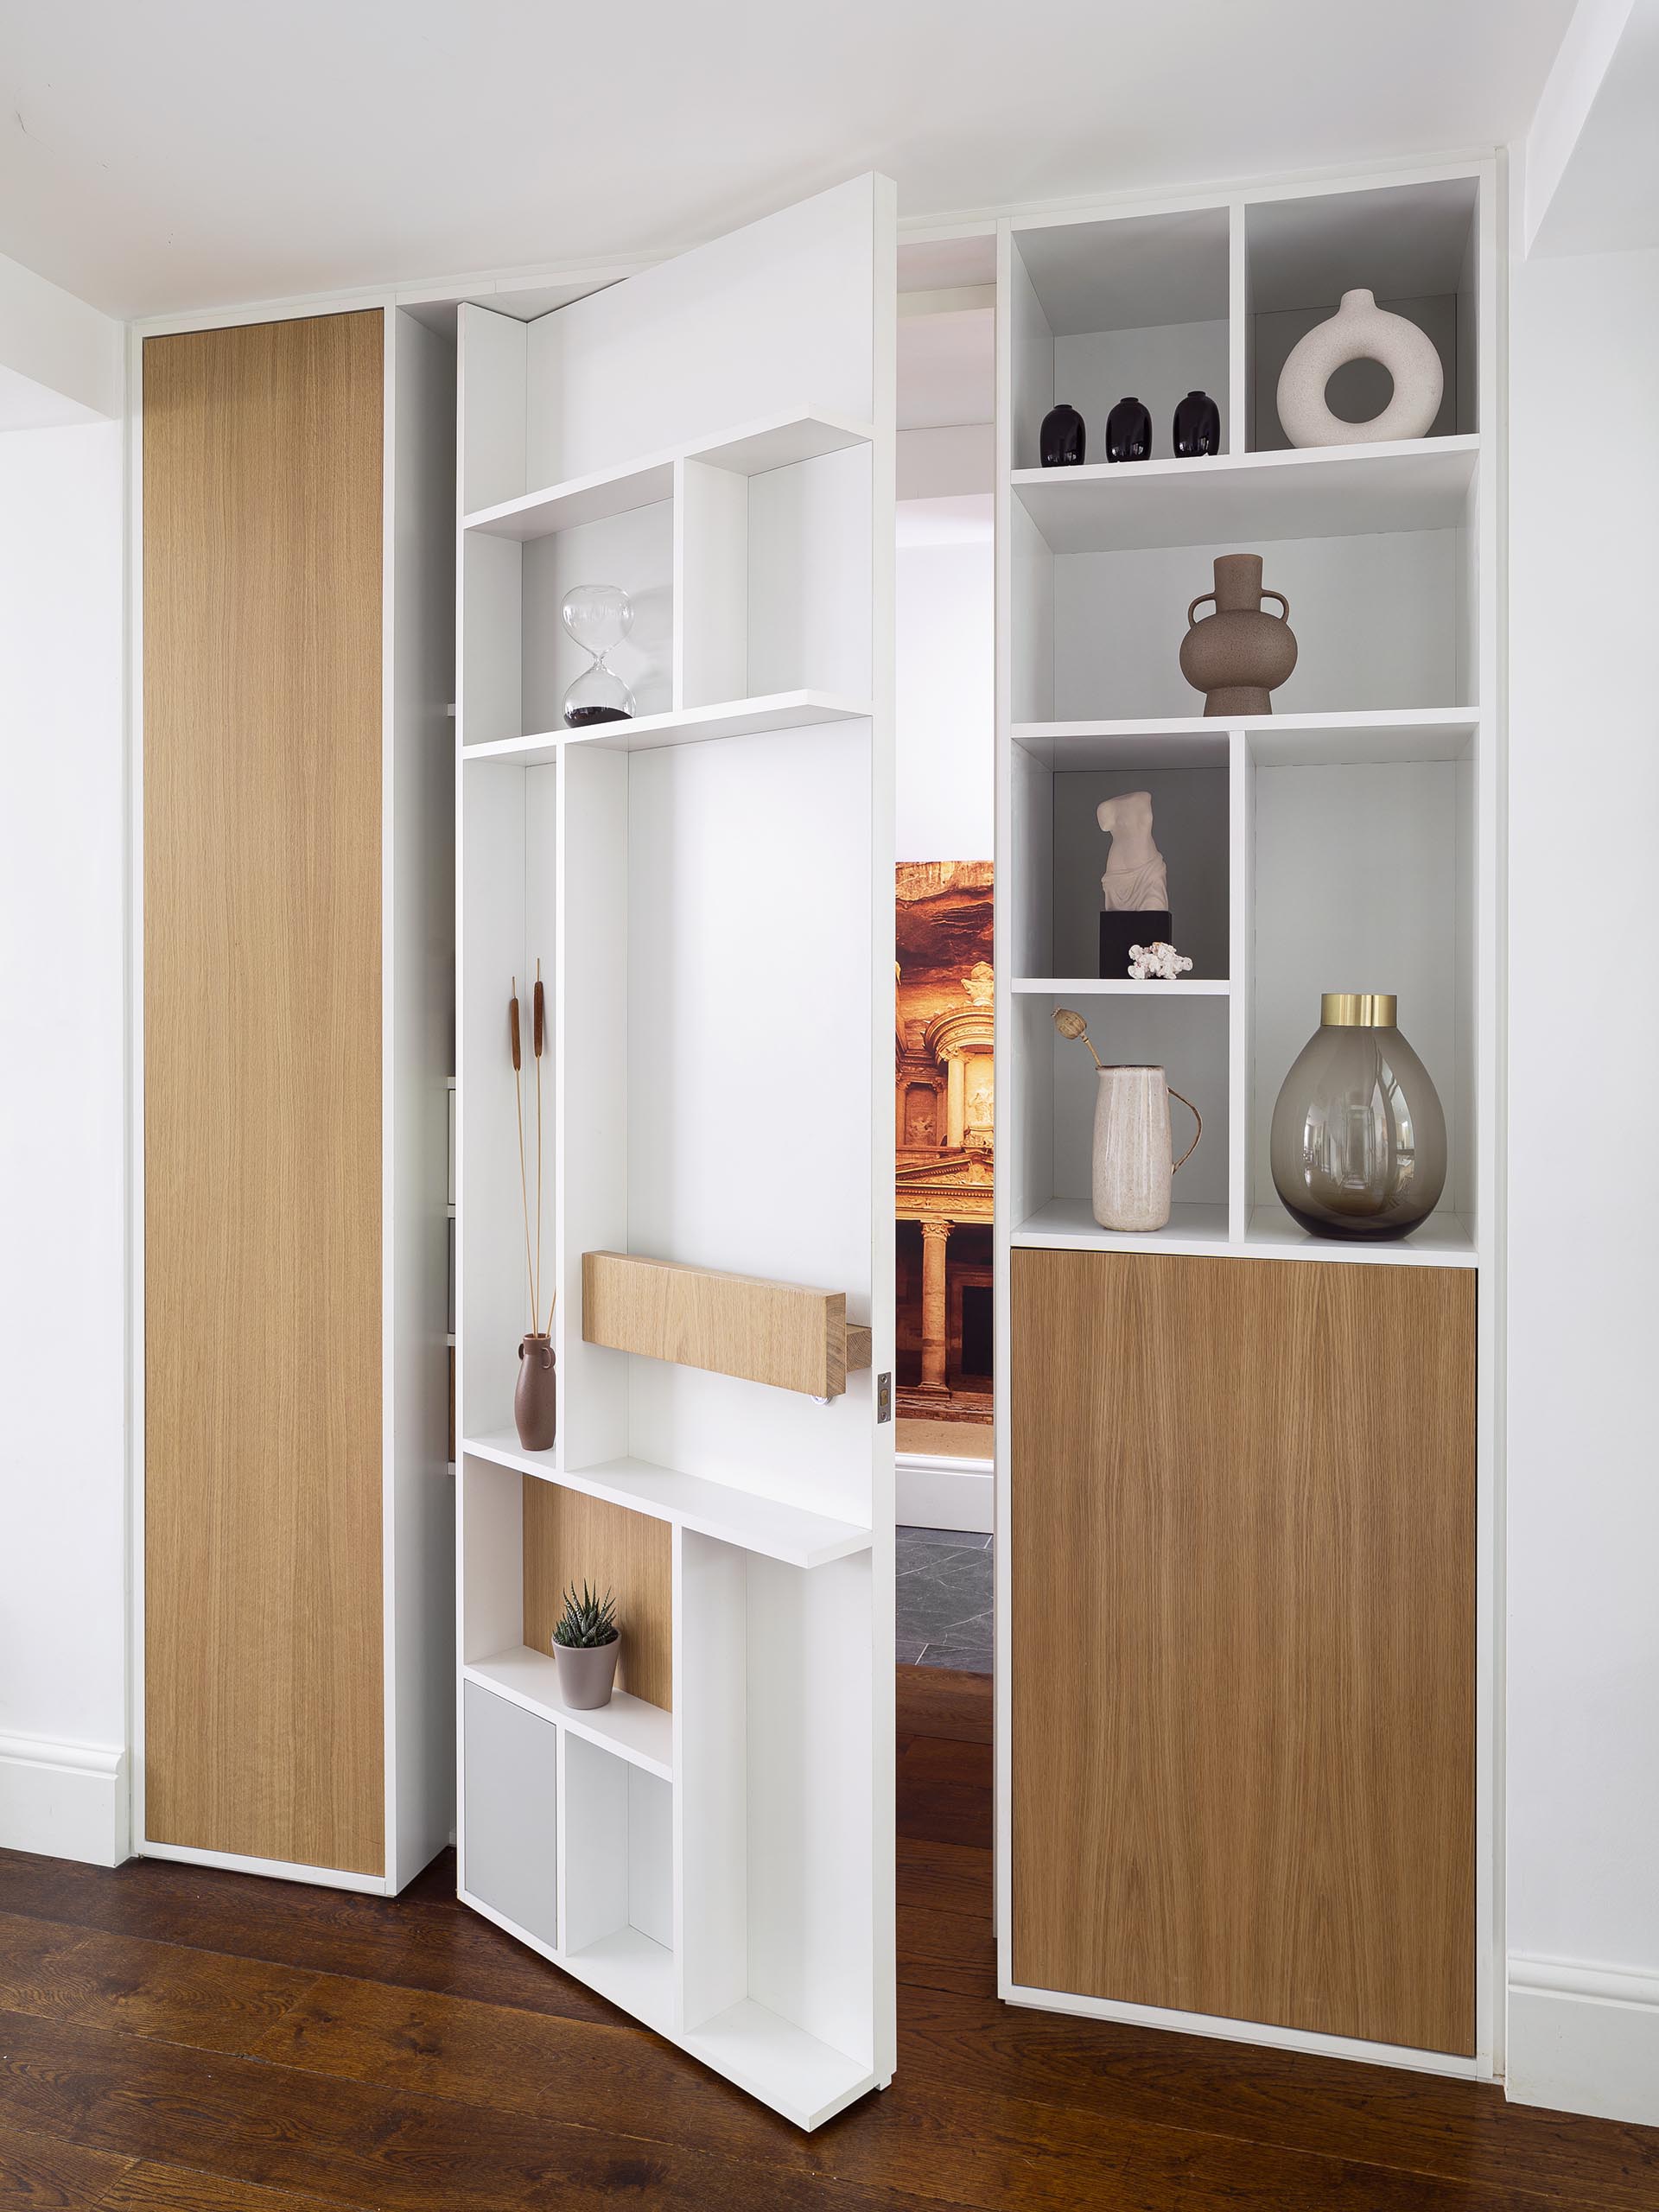 This pivoting door which sits flush with the surrounding shelves and has a simple wood handle that matches the other wood details, and simply swings open to reveal the bathroom.